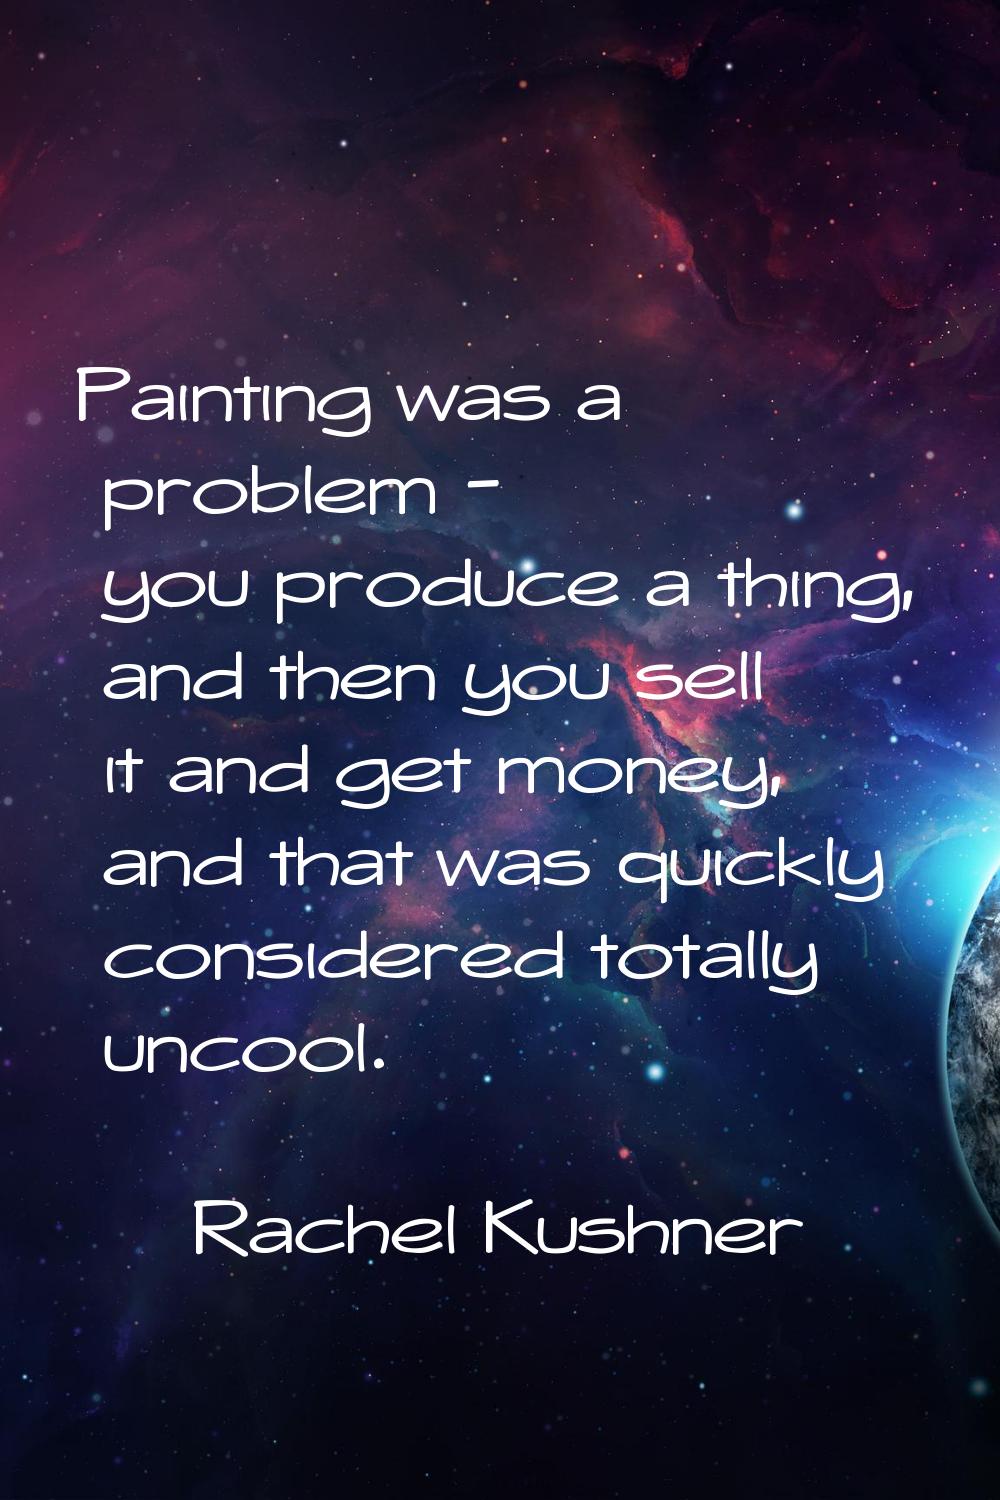 Painting was a problem - you produce a thing, and then you sell it and get money, and that was quic